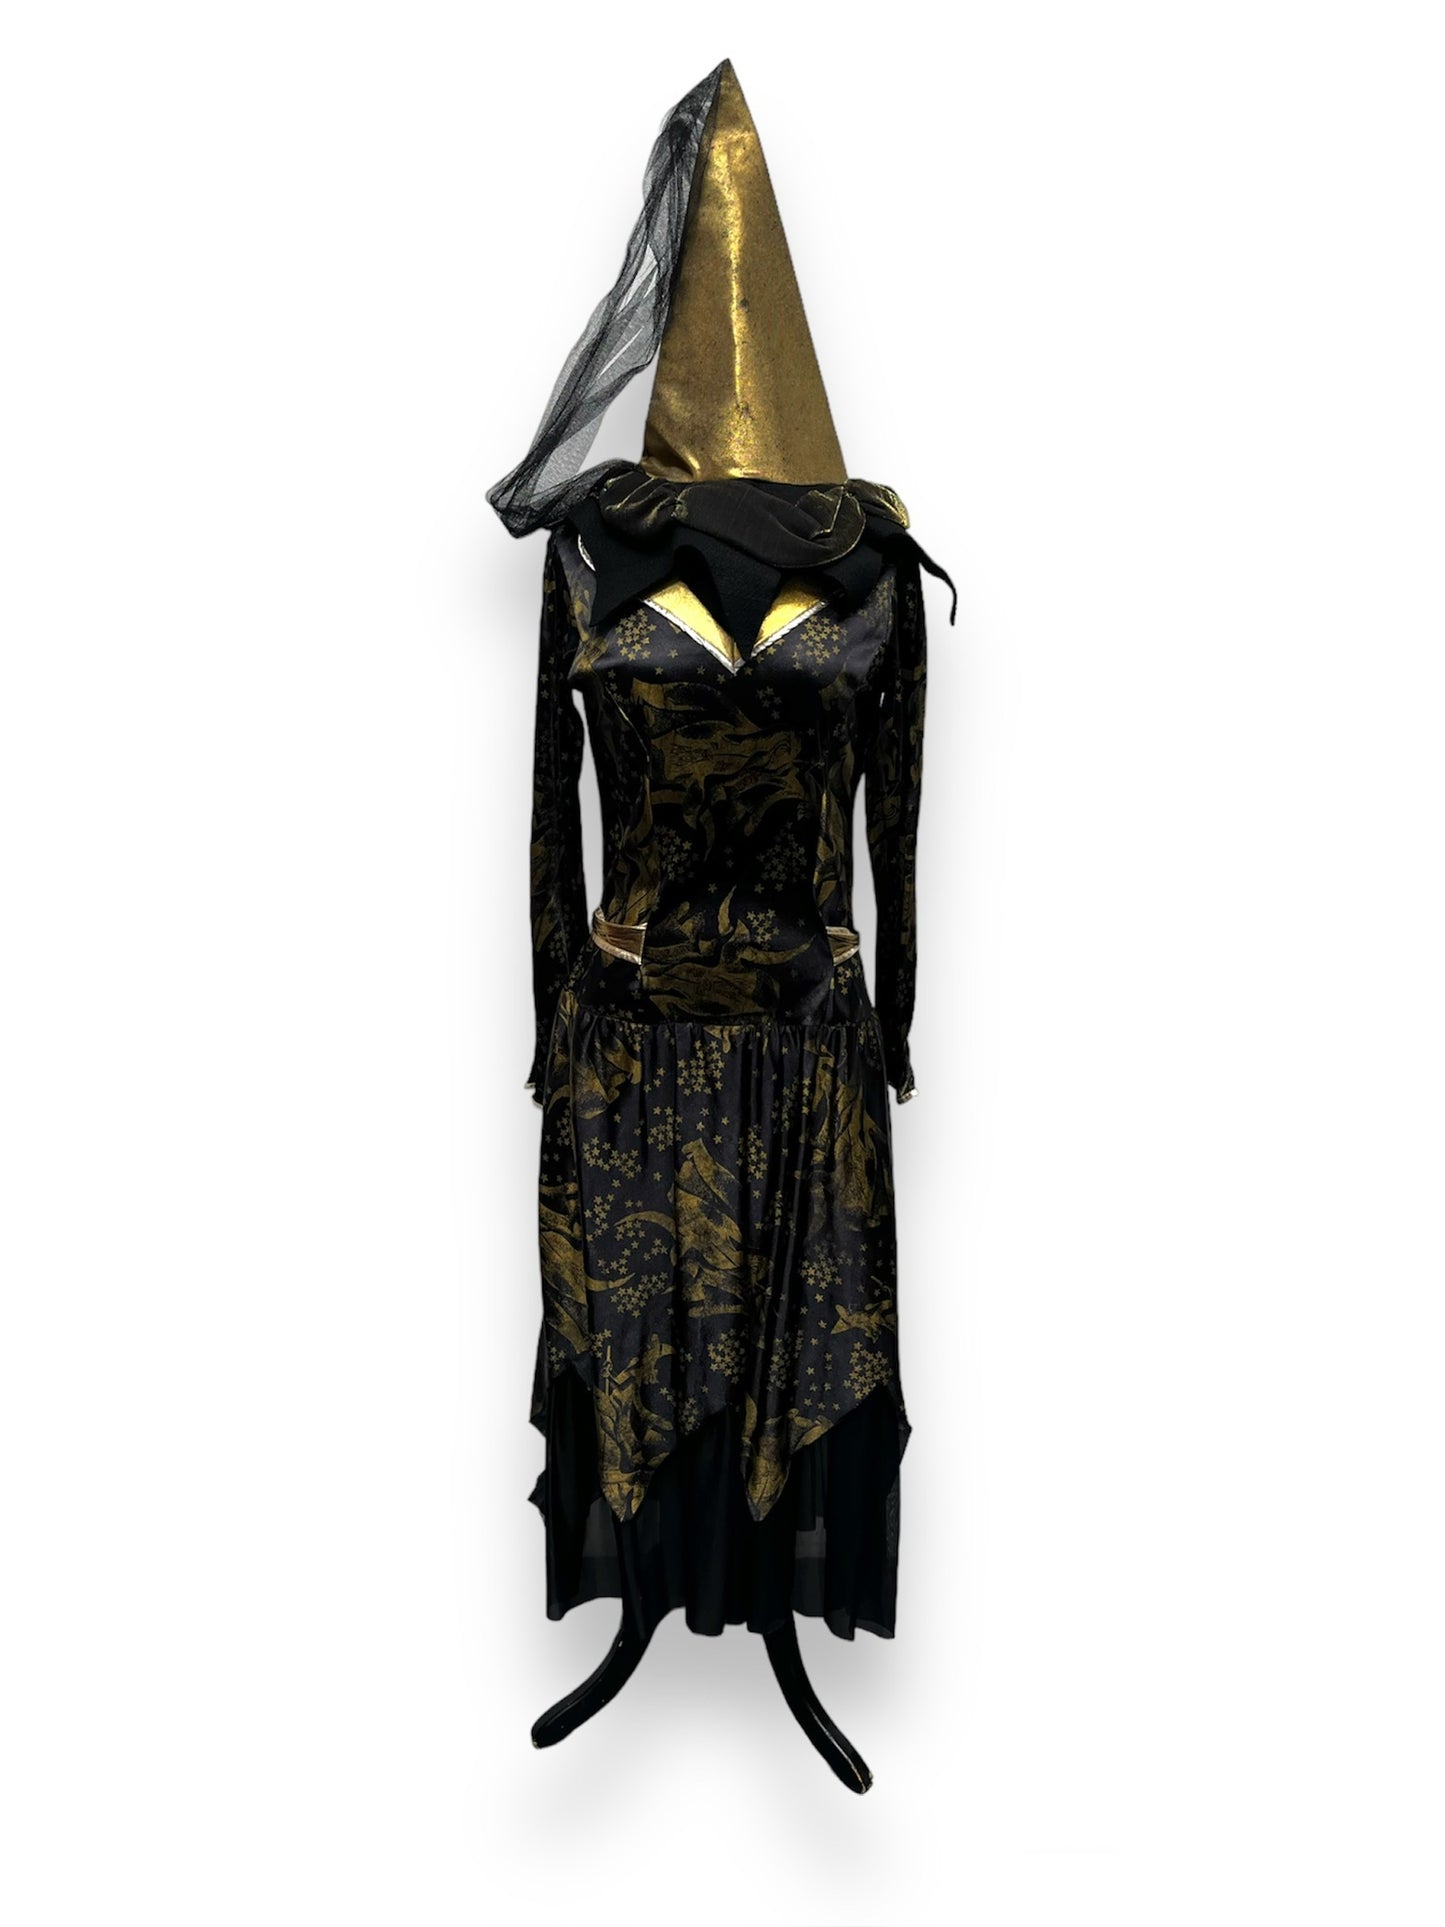 Halloween Wicked Witch Black Gold Dress Size 18-20 - Ex Hire Fancy Dress Costume